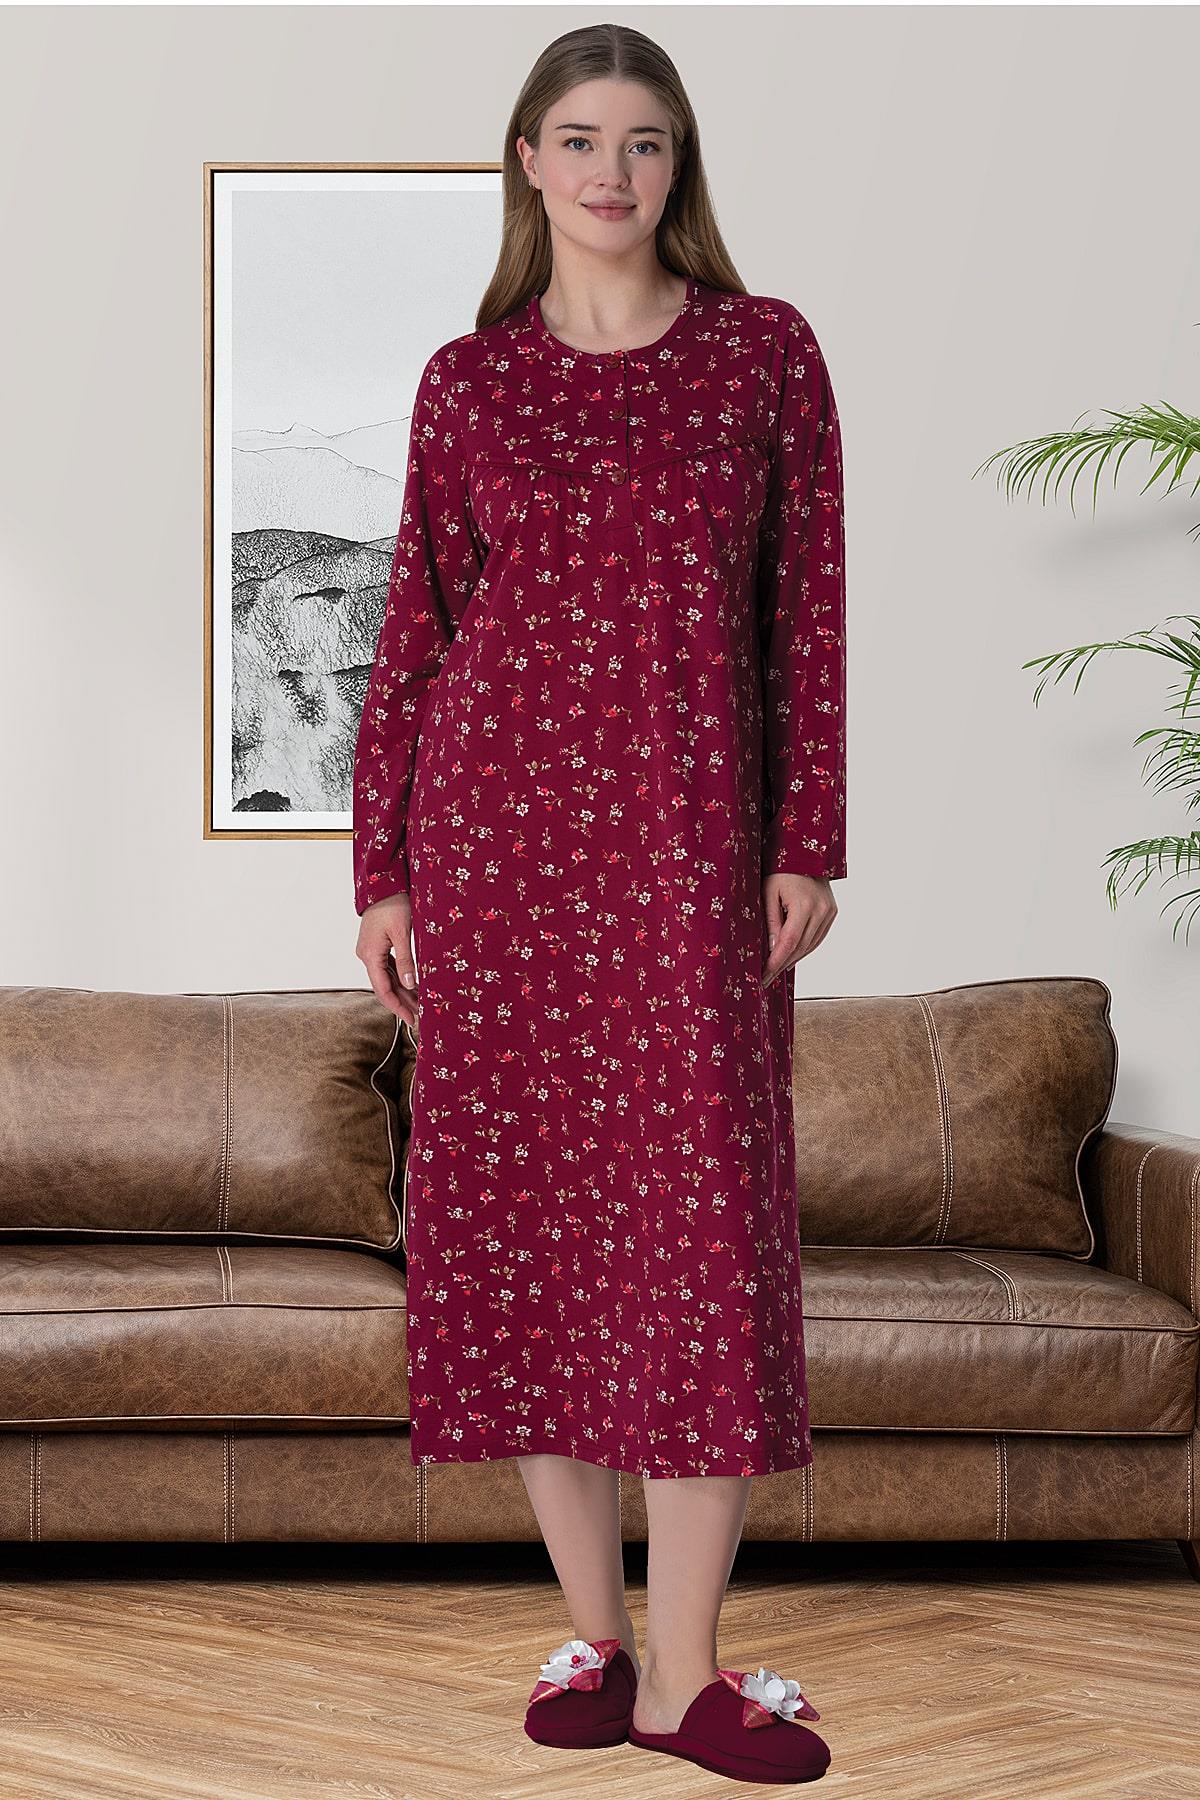 Shopymommy 6025 Flowery Plus Size Maternity & Nursing Nightgown Claret Red